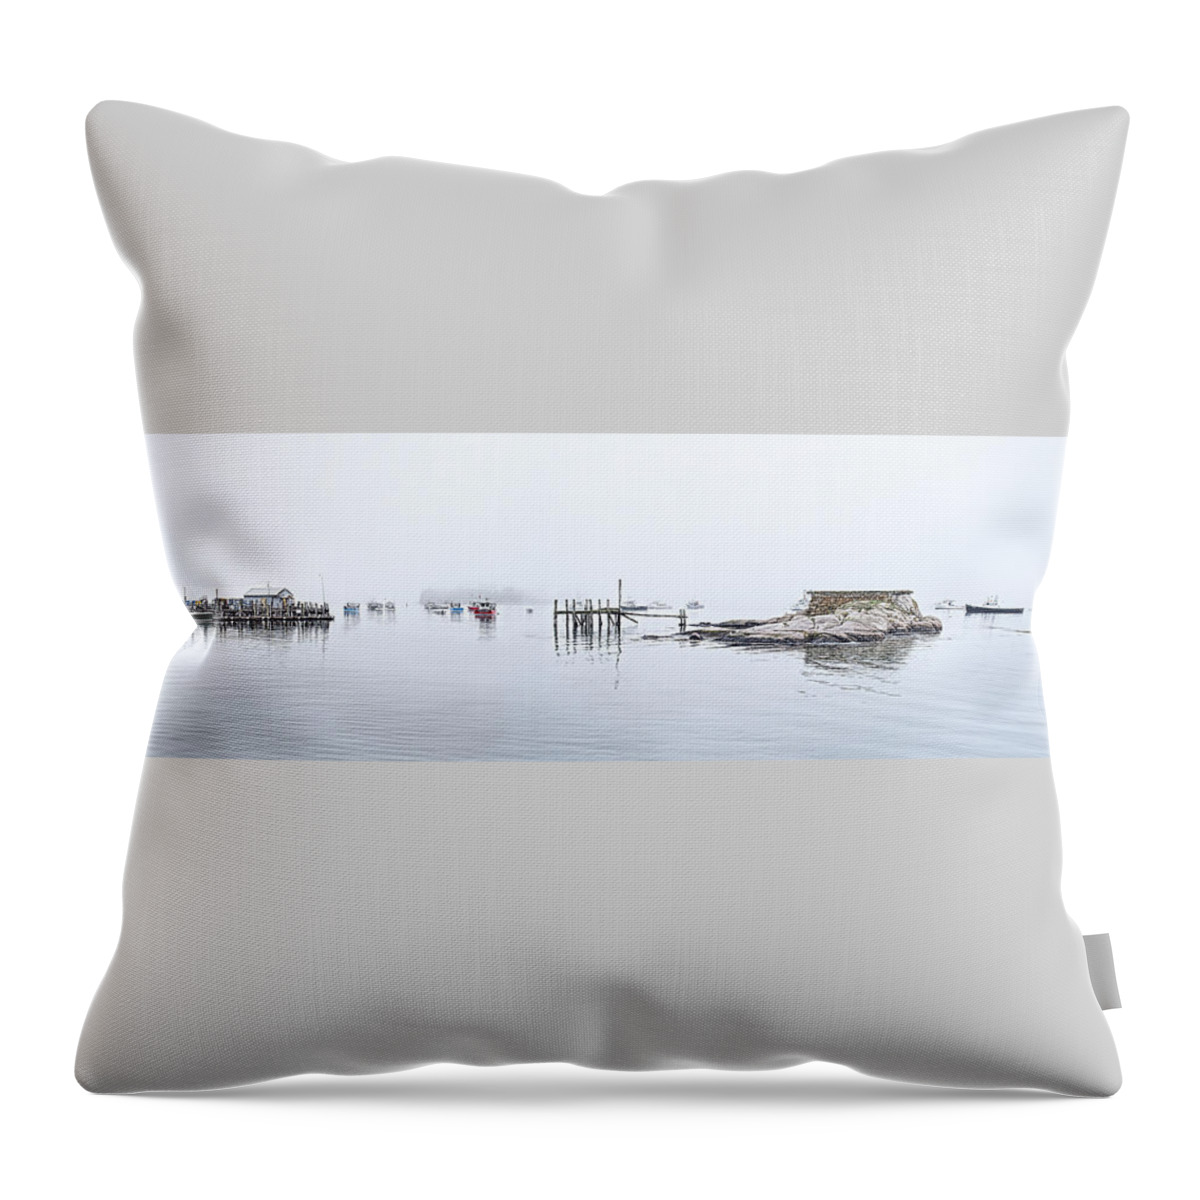 Fog Lifting Throw Pillow featuring the photograph Fog Lifting Stonington Harbor Panorama by Marty Saccone